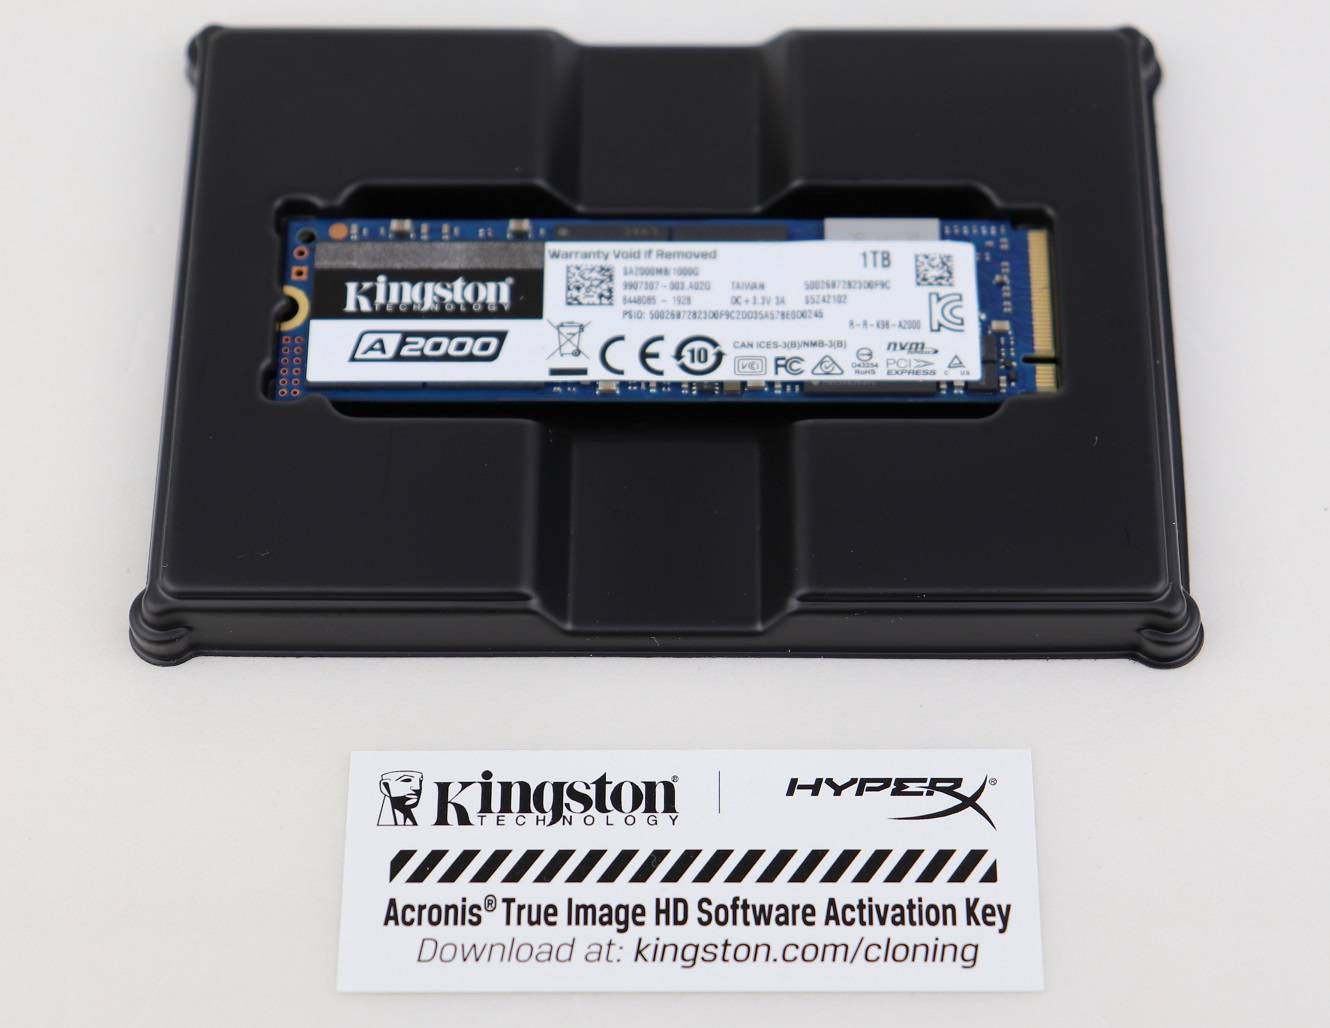 Many Accounting Compose Unboxing and Review of Kingston A2000 1TB PCIe NVMe SSD | UnbxTech